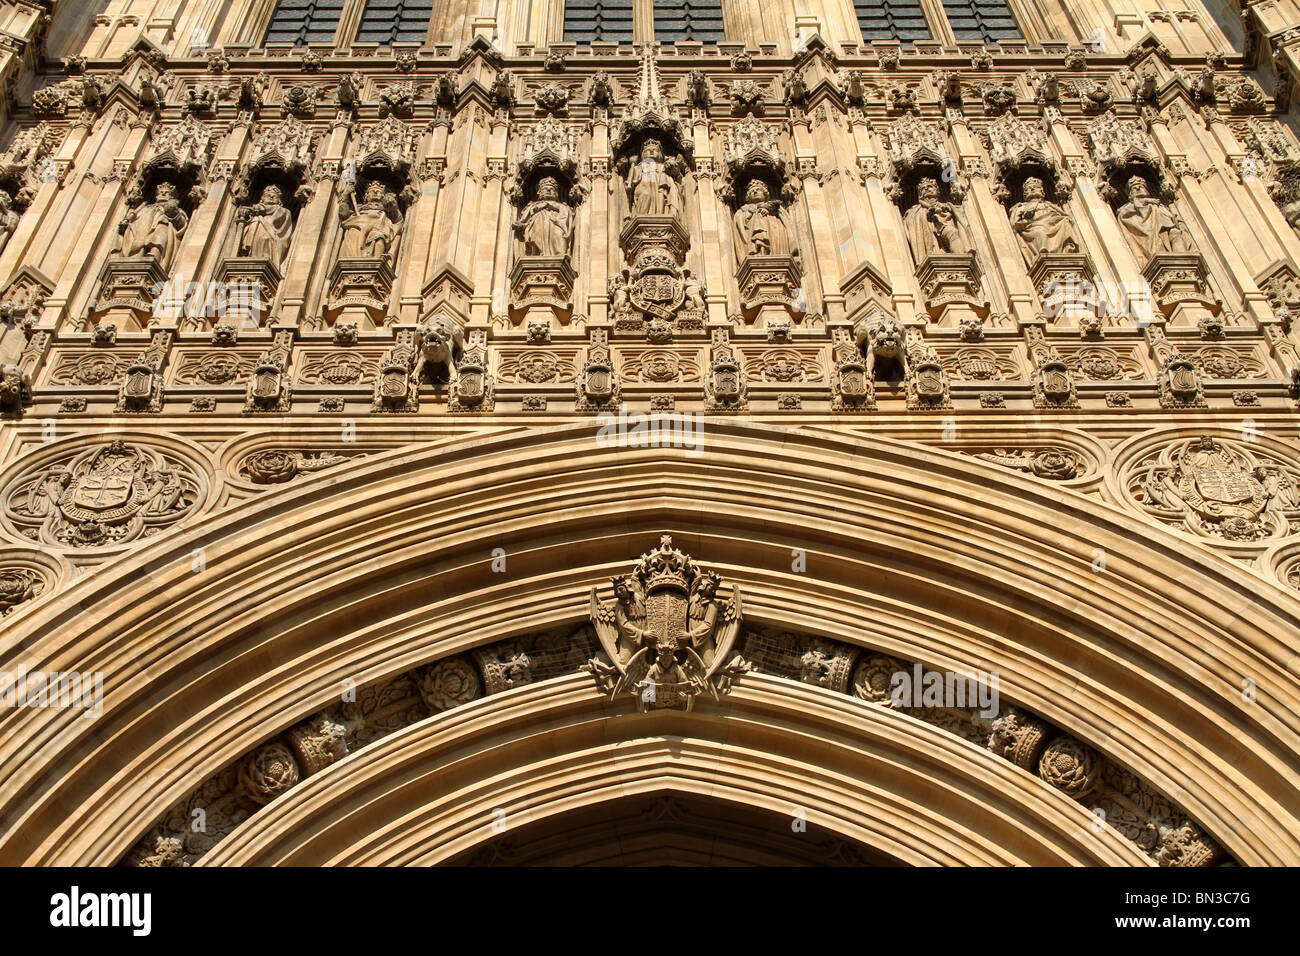 Arch on Victoria Tower of the Houses of Parliament in the Palace of Westminster, London, England Stock Photo